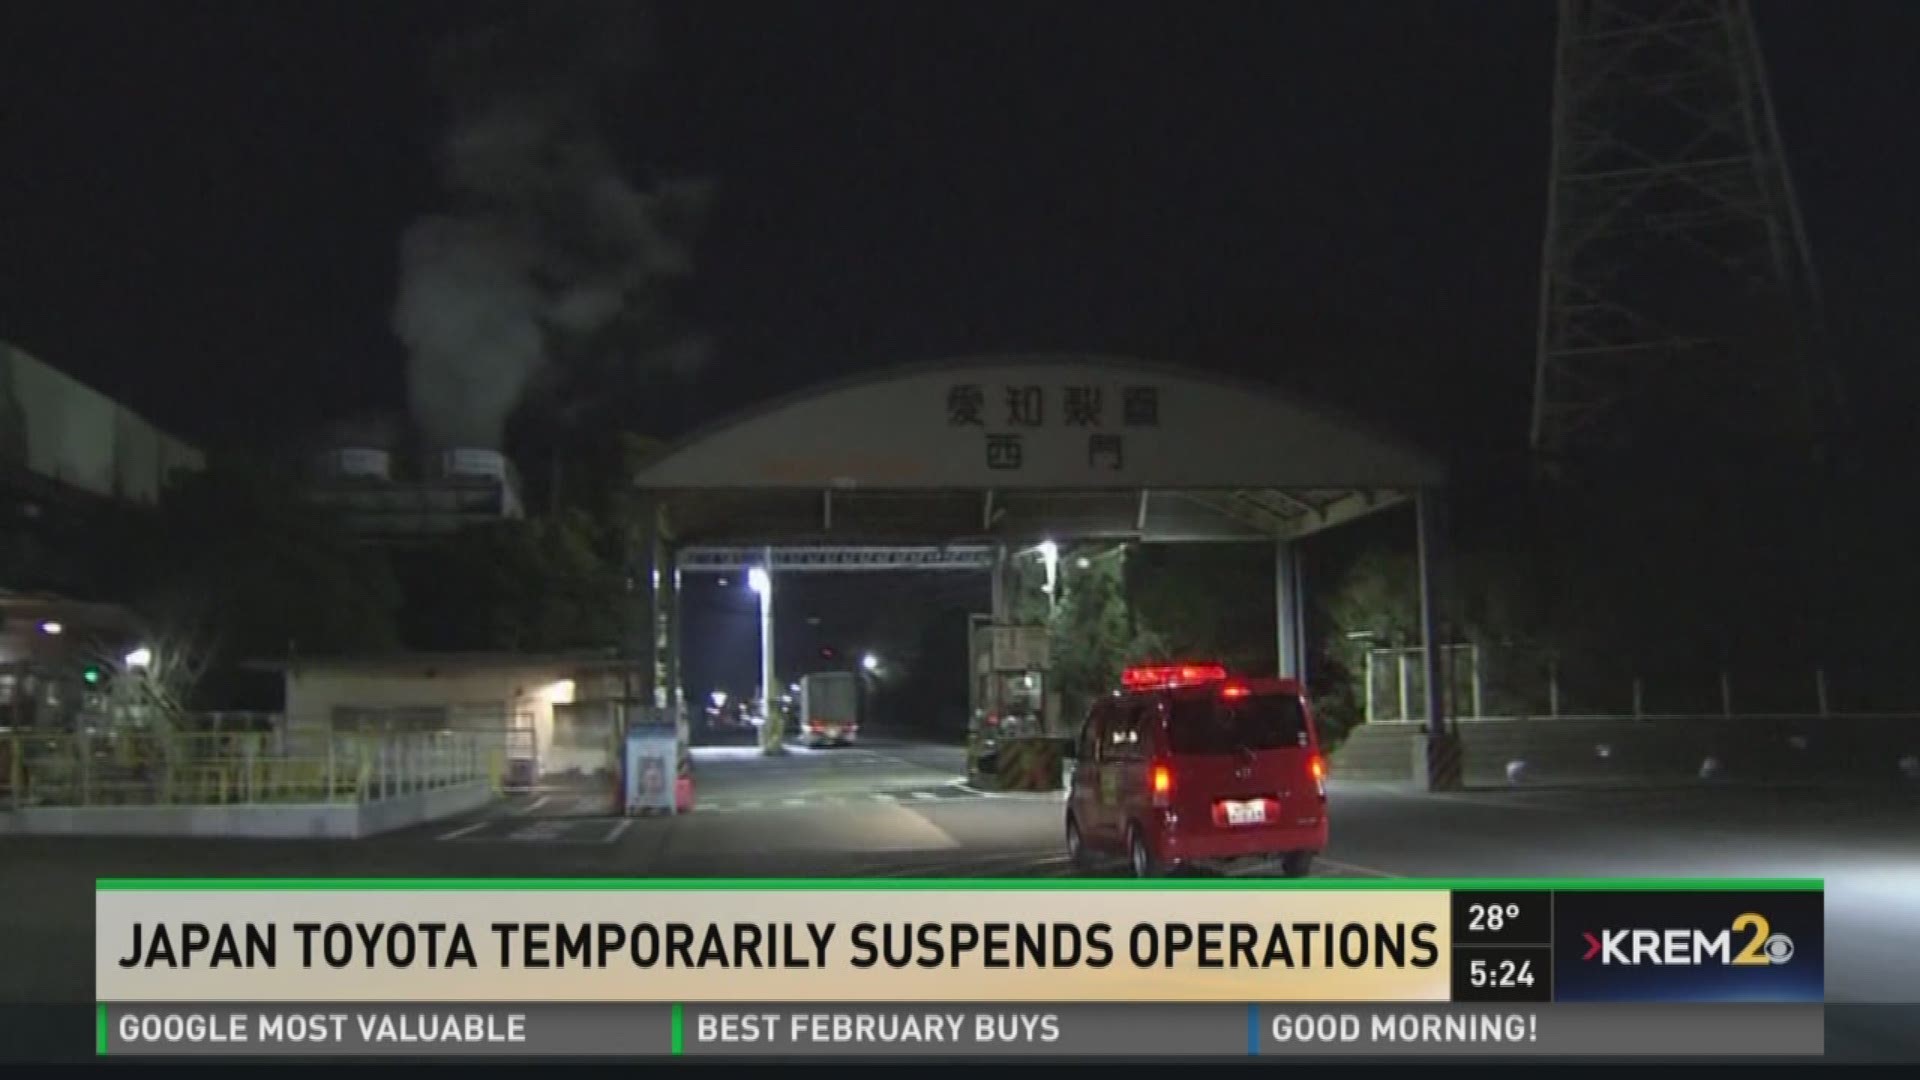 Japan Toyota temporarily suspends operations